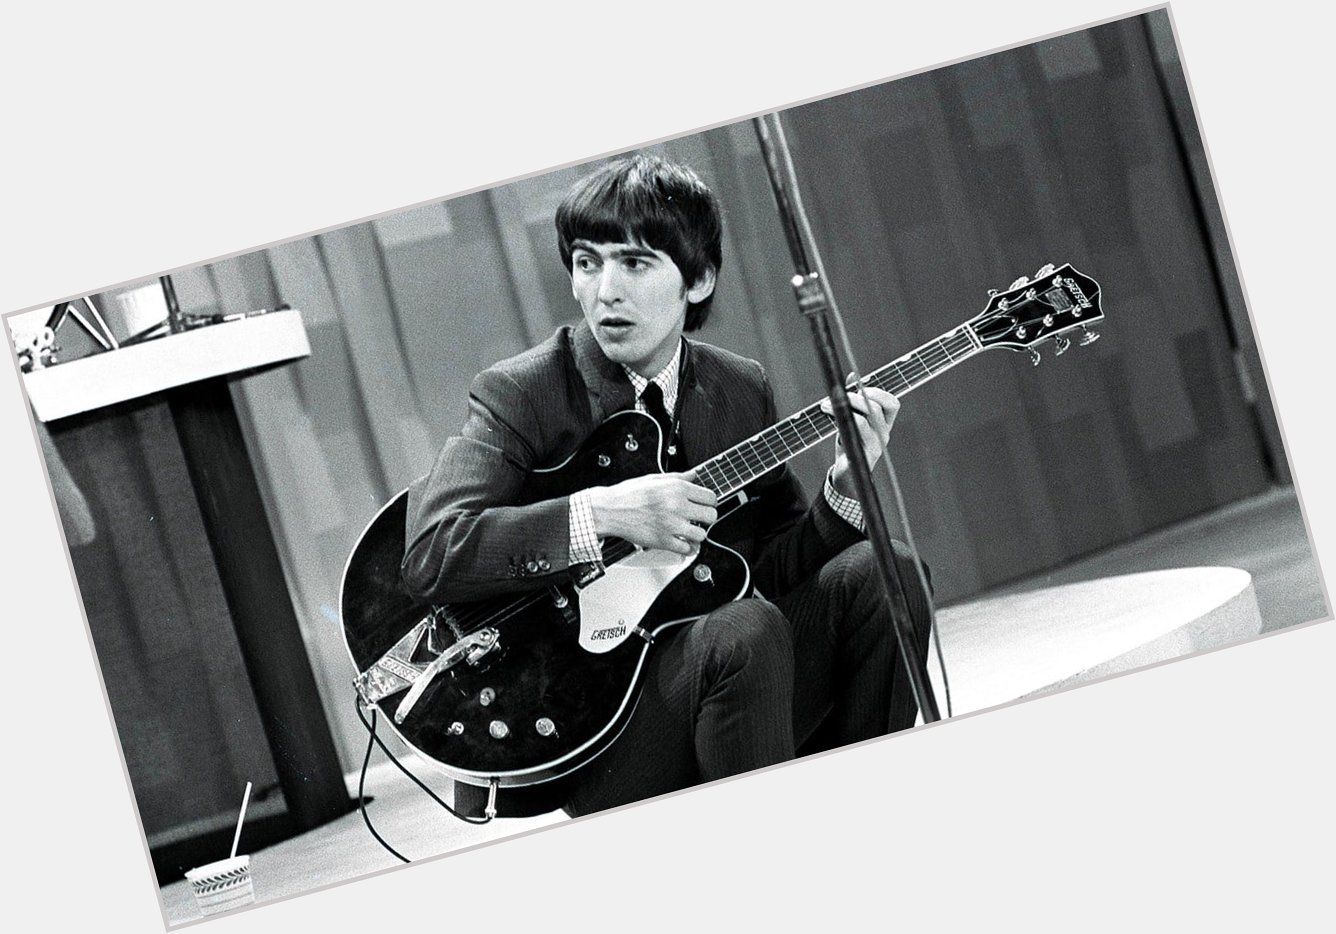 Happy birthday to George Harrison! He would have been 74 today. 